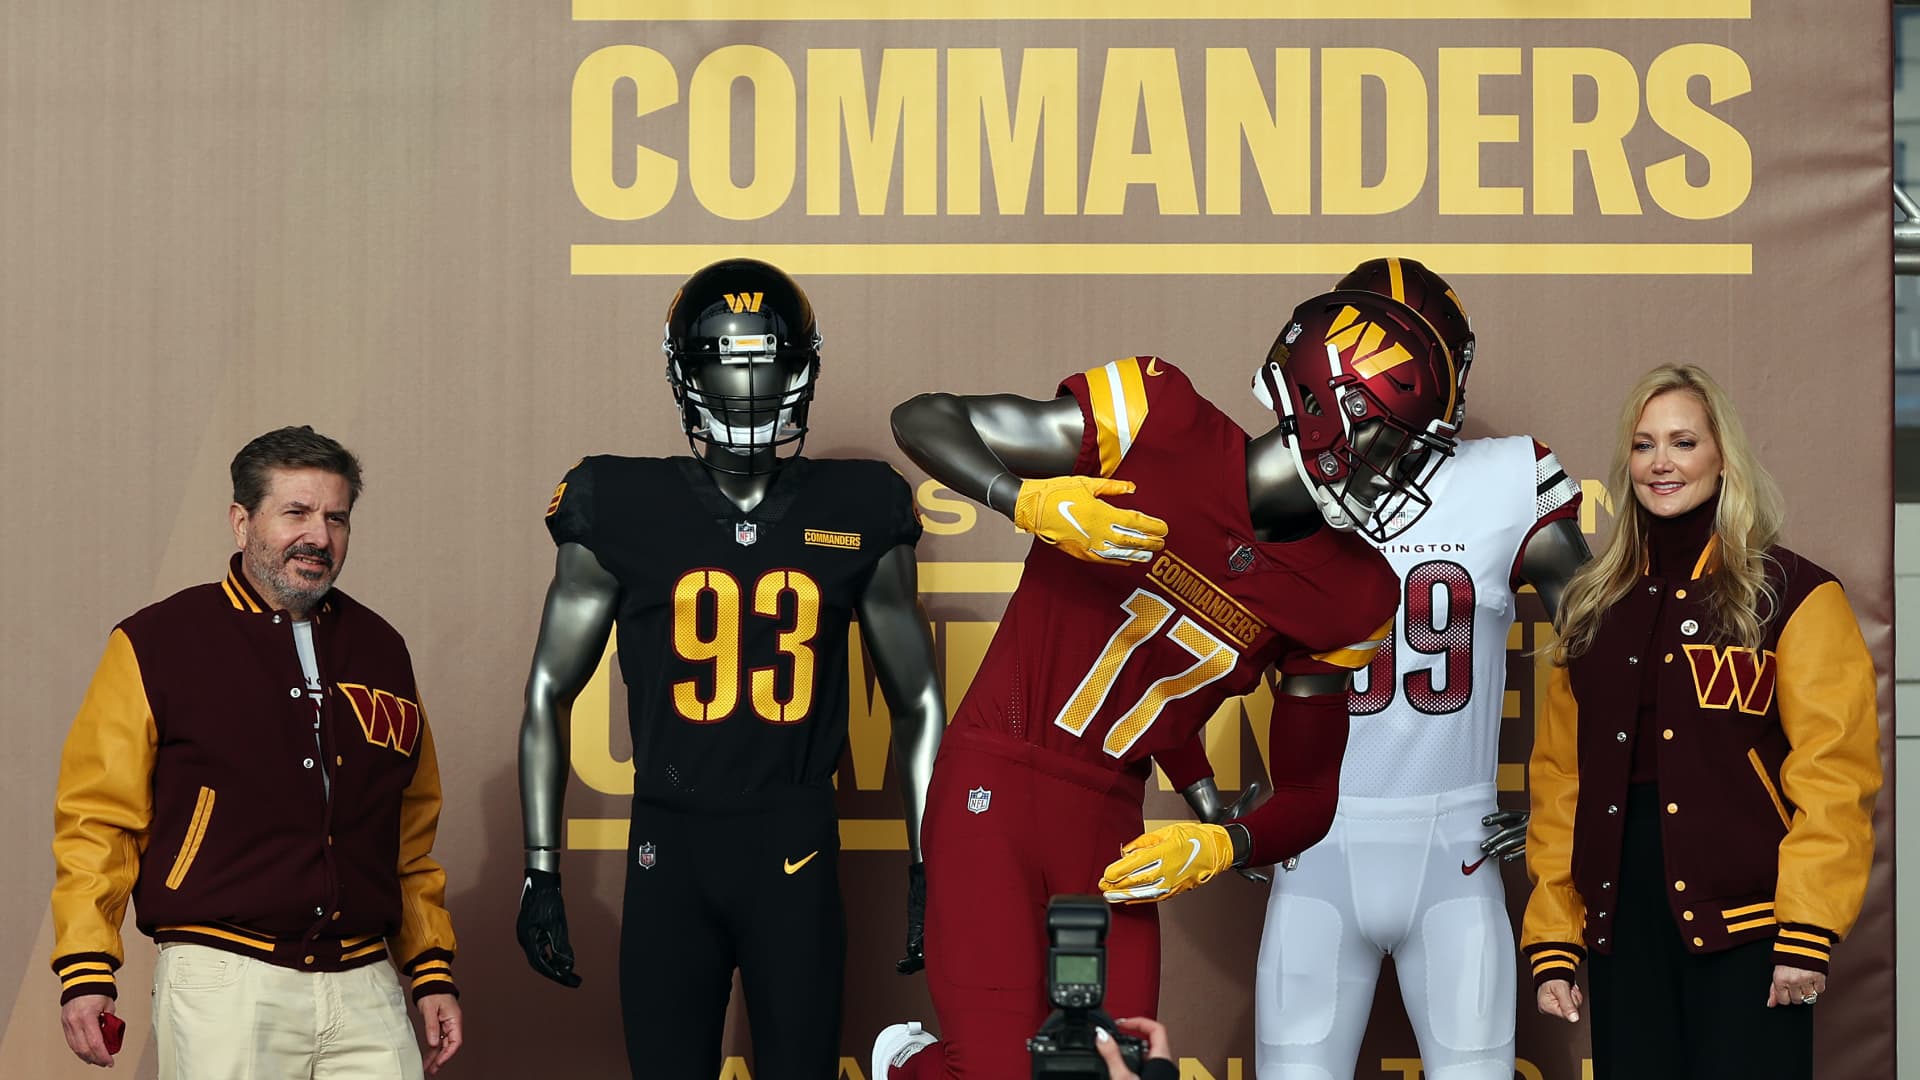 Team co-owners Dan and Tanya Snyder pose for a photo with the new team uniforms during the announcement of the Washington Football Team's name change to the Washington Commanders at FedExField on February 02, 2022 in Landover, Maryland.